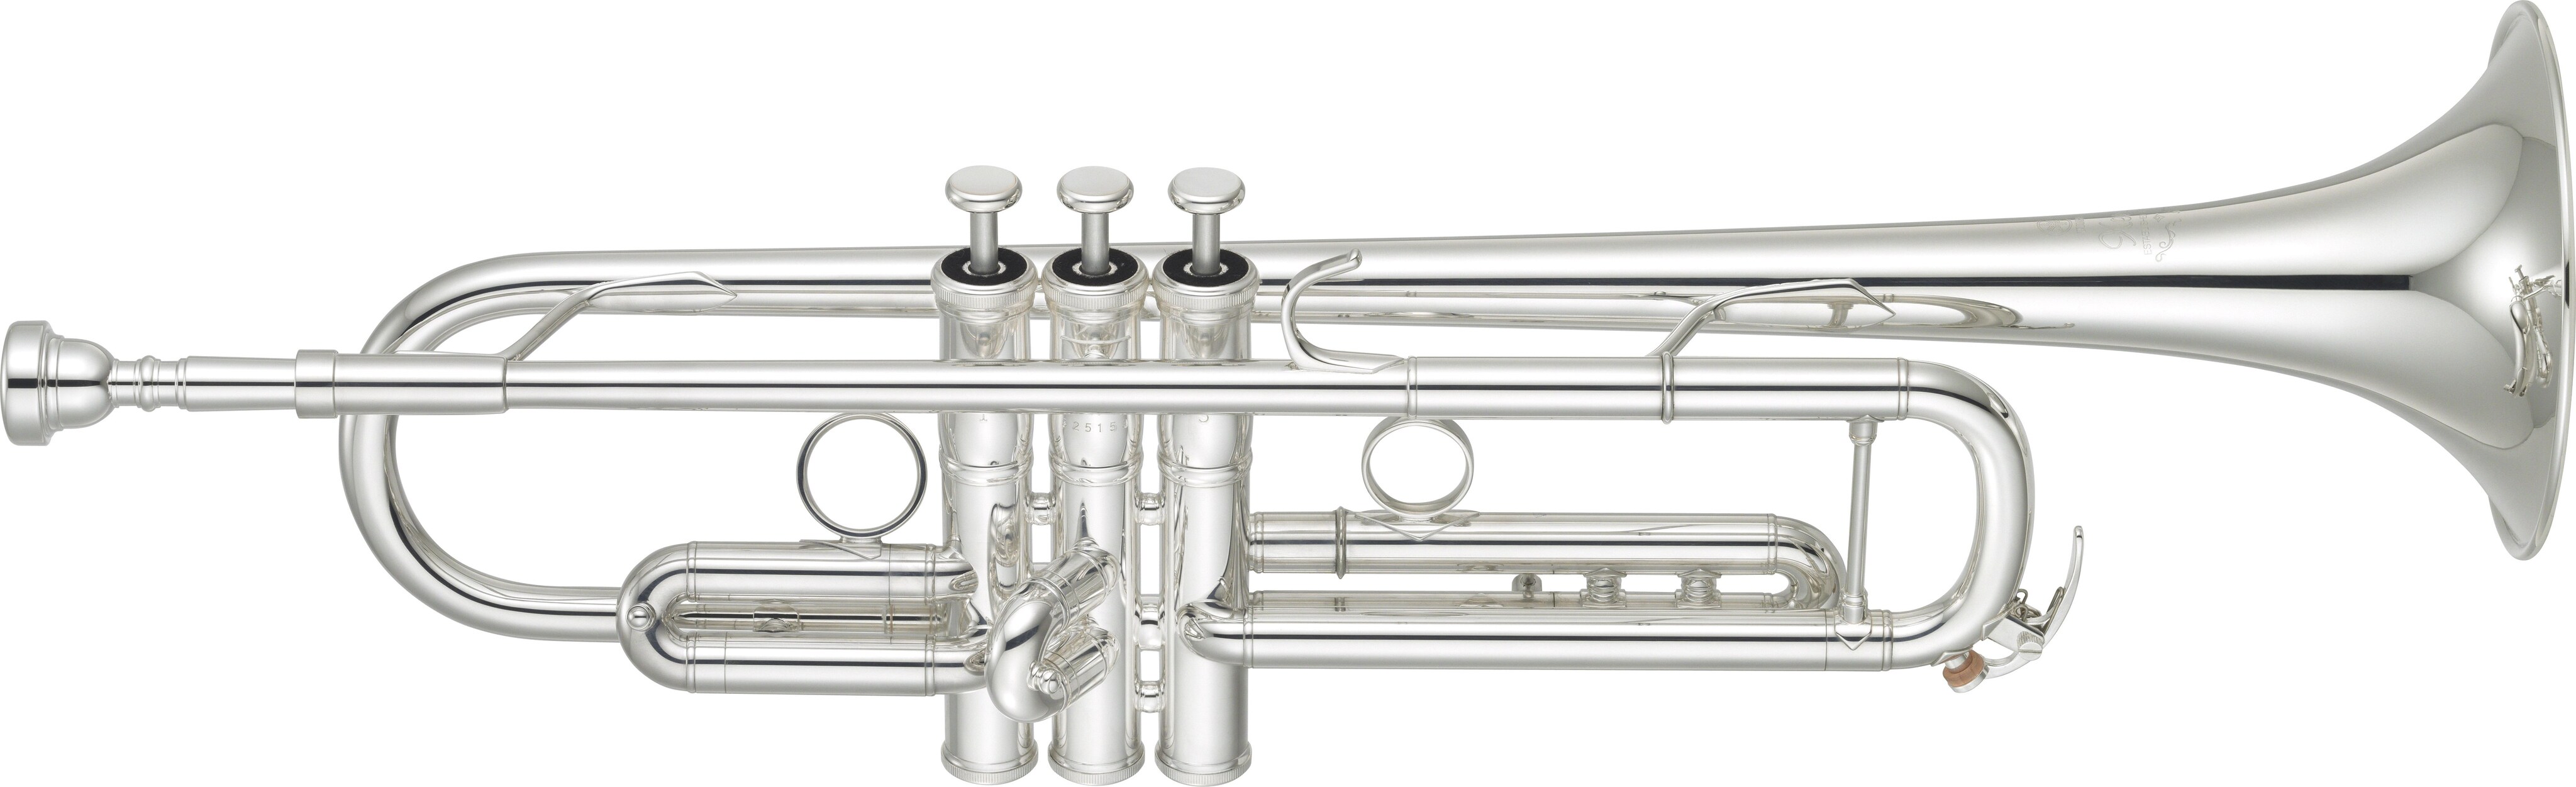 YTR-8335RS - Overview - Bb Trumpets - Trumpets - Brass & Woodwinds 